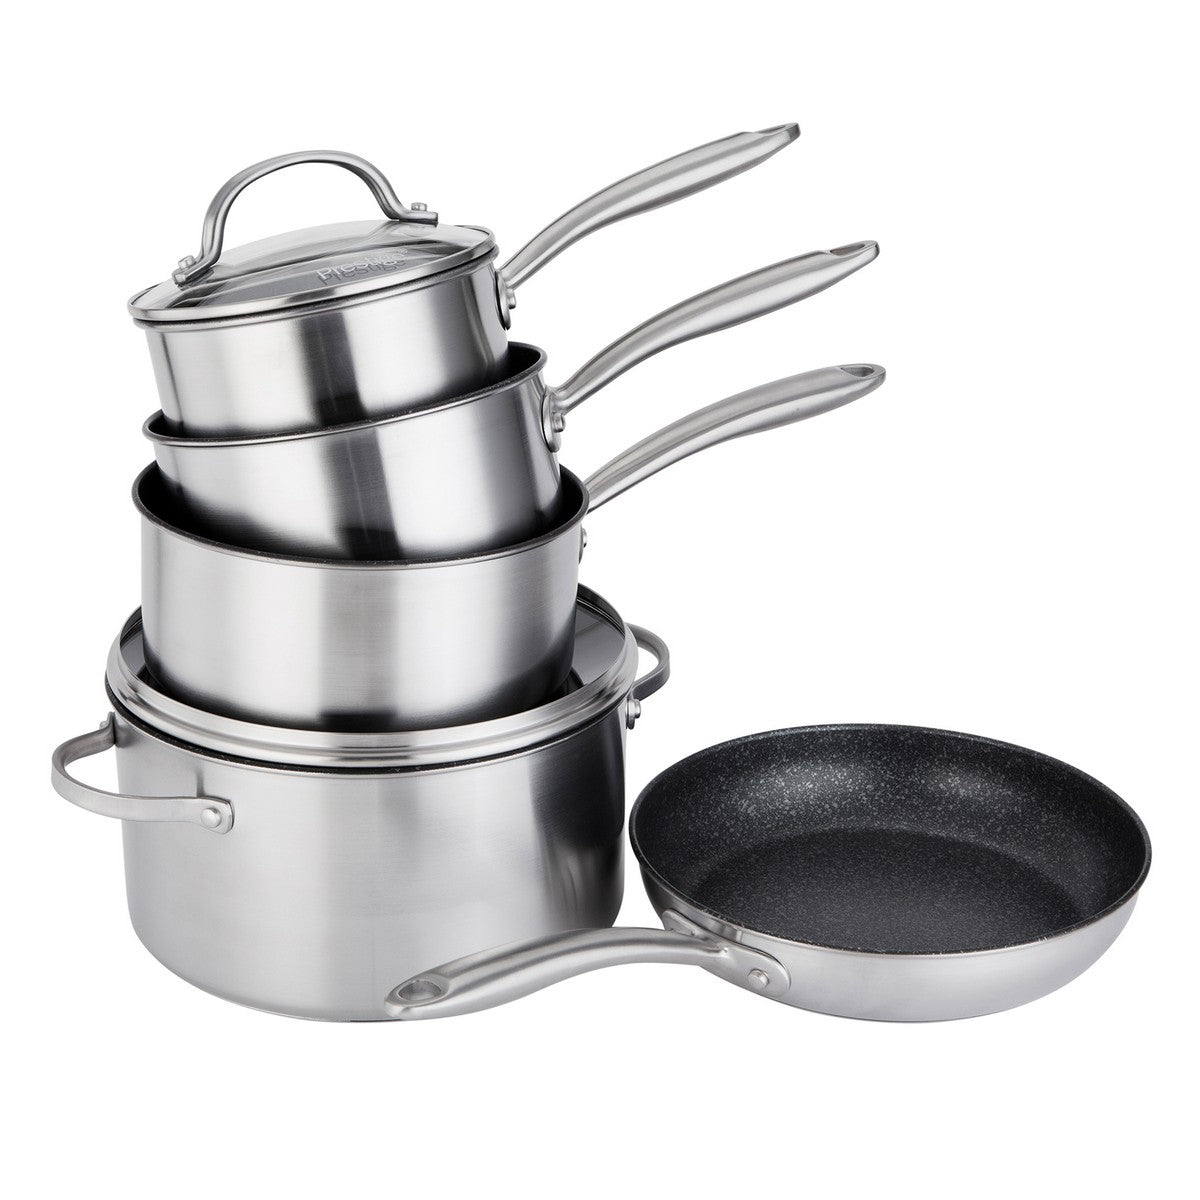 An image of Scratch Guard Non Stick Stainless Steel 5 Piece Pan Set